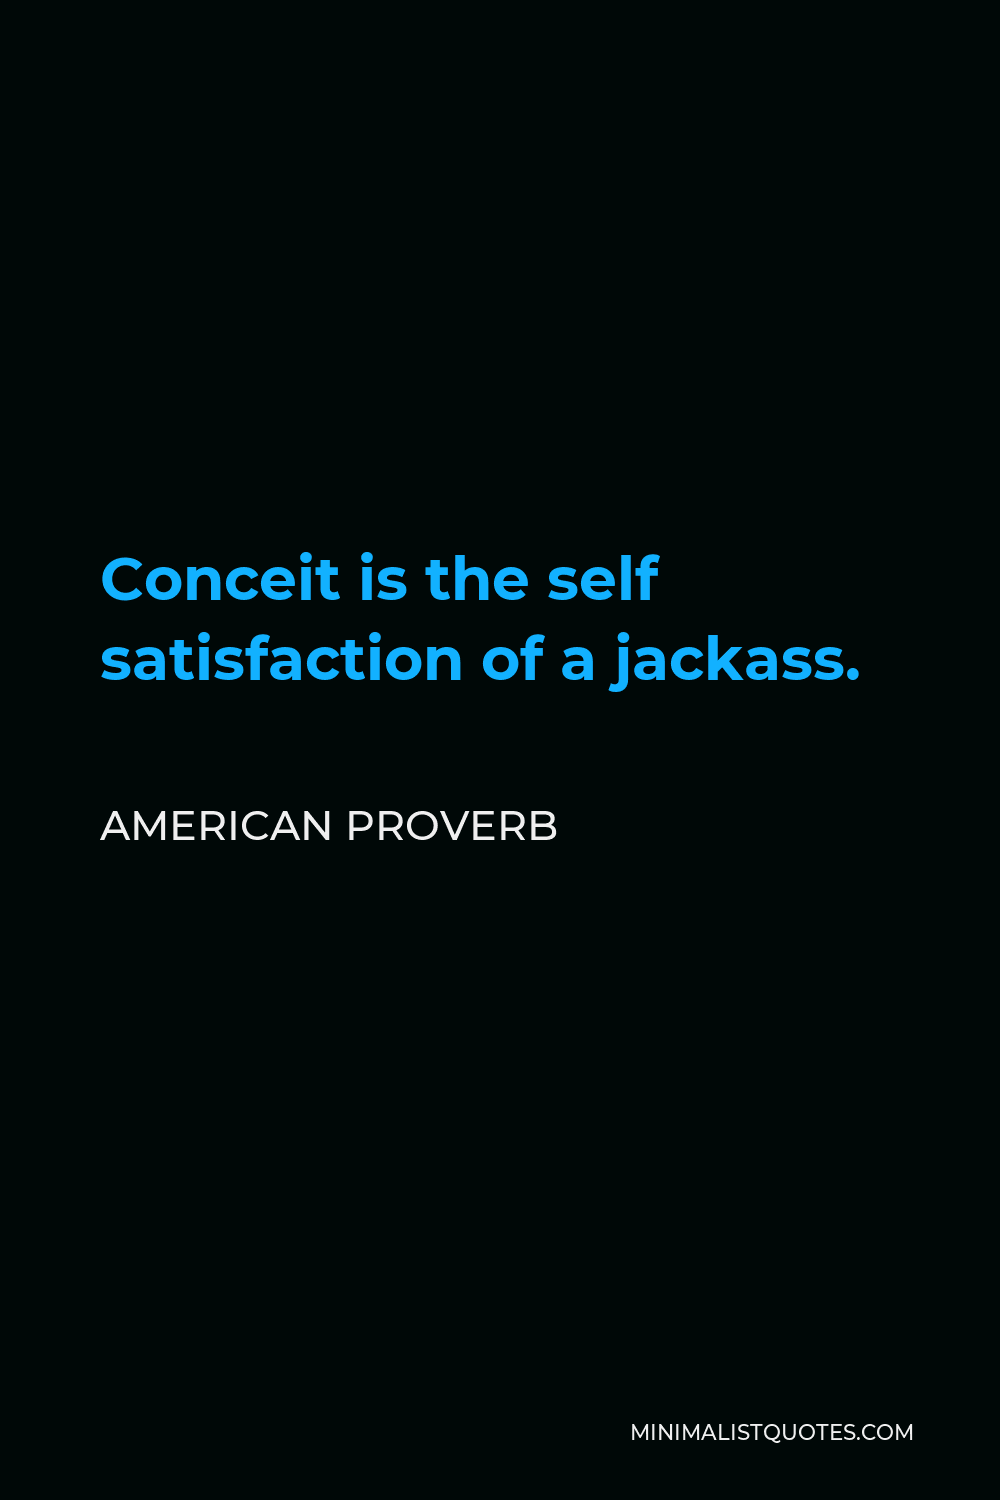 American Proverb Quote - Conceit is the self satisfaction of a jackass.